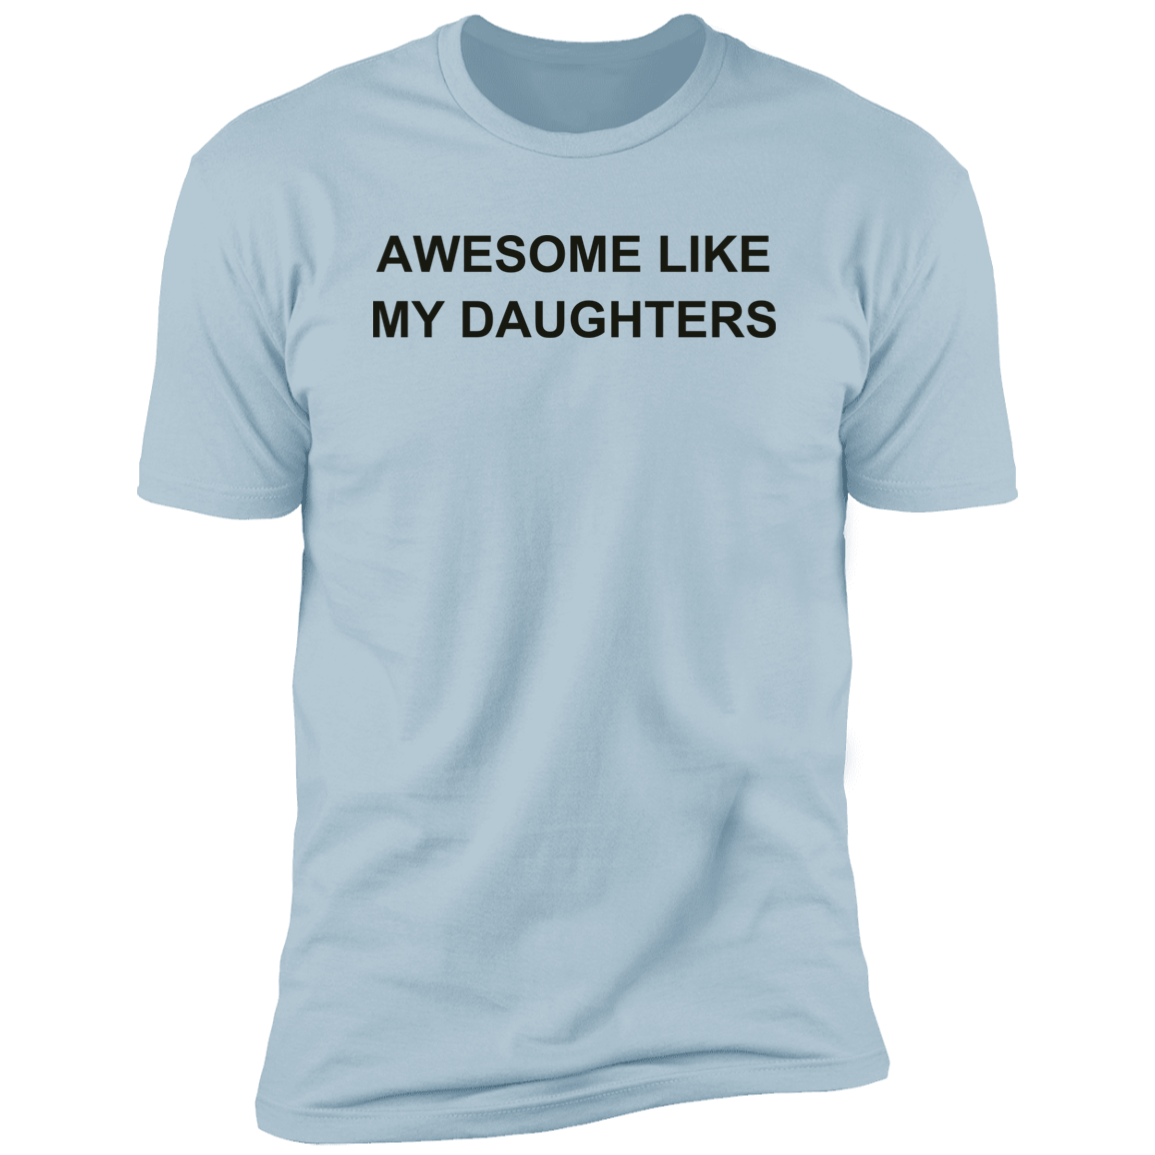 Awesome Like my Daughters T-Shirt